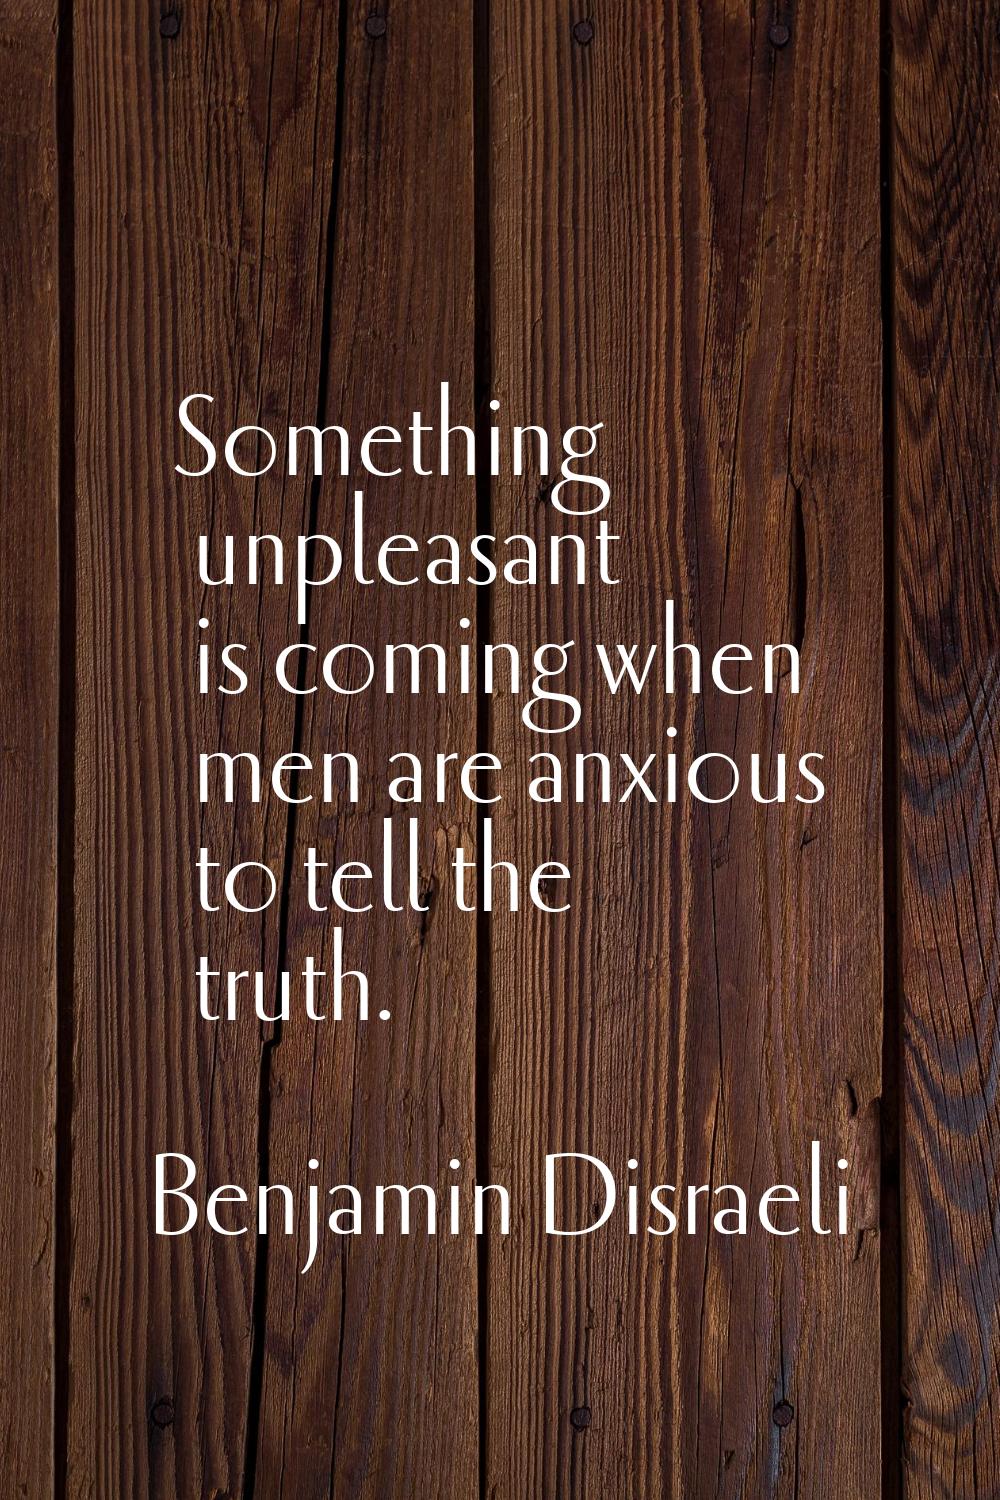 Something unpleasant is coming when men are anxious to tell the truth.